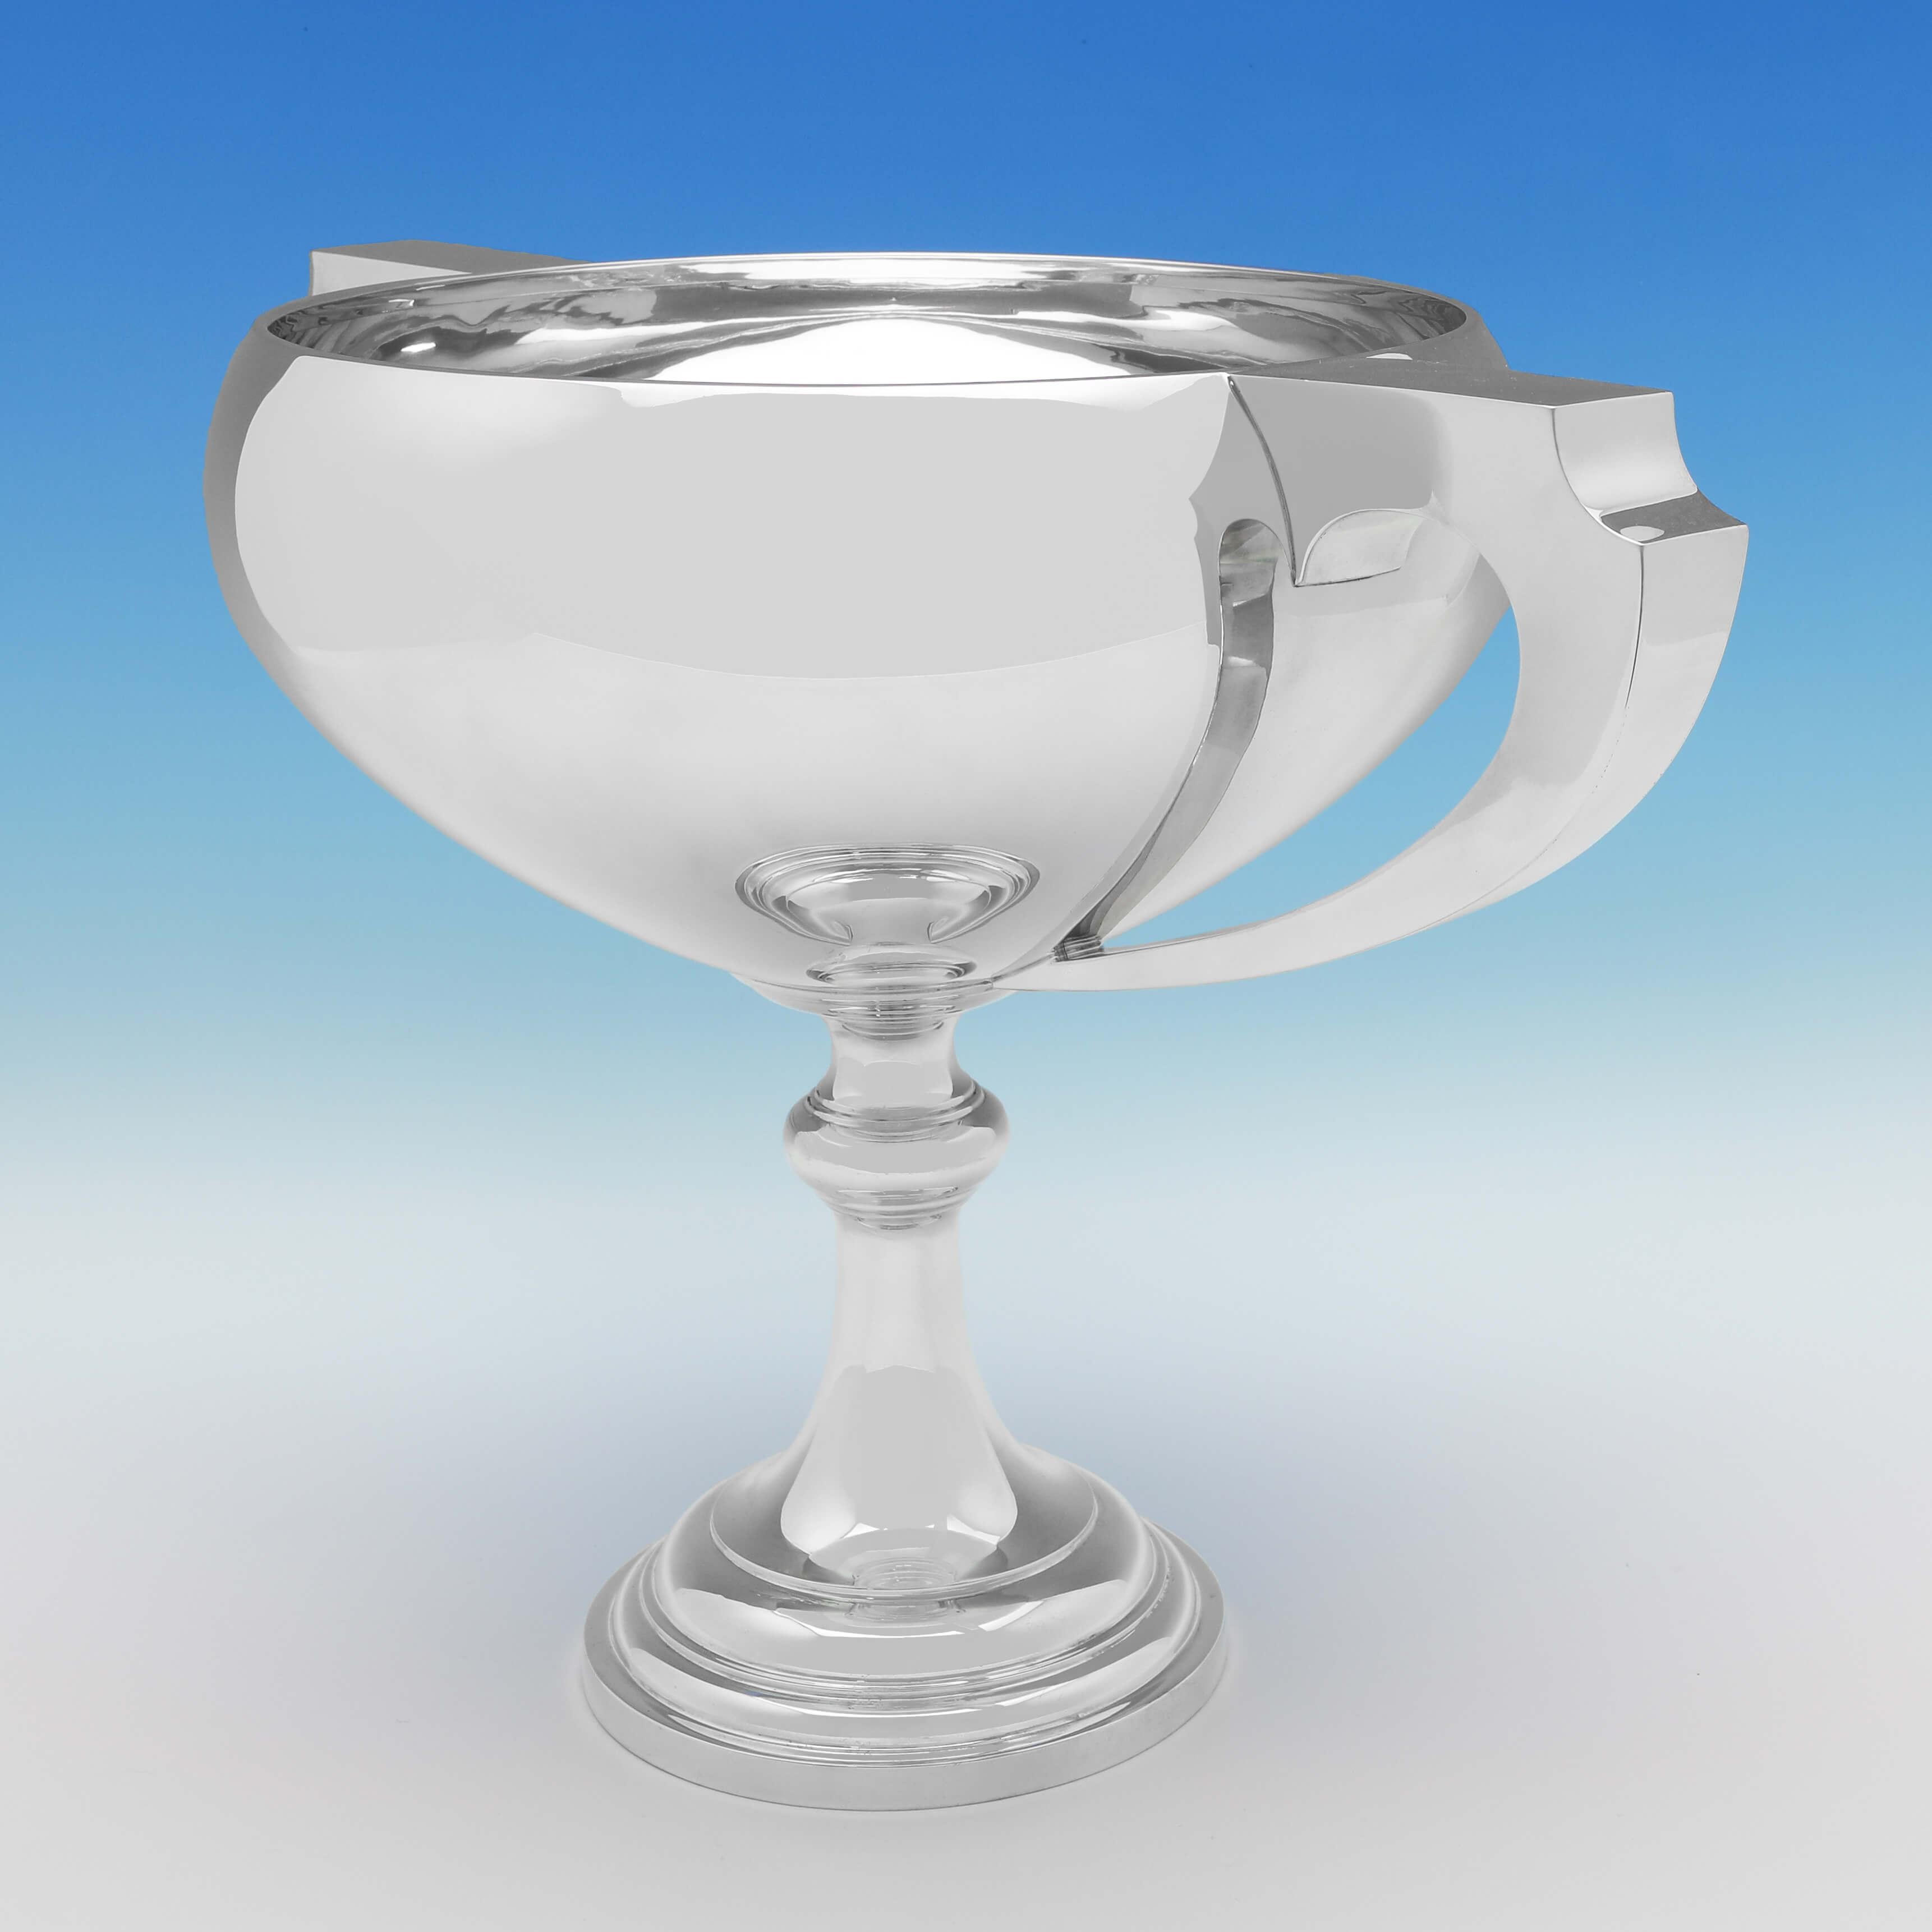 Hallmarked in Birmingham in 1937 by Mappin & Webb, this very handsome, Sterling Silver Trophy, is in the Art Deco taste, and plain in style. The trophy measures 12.75